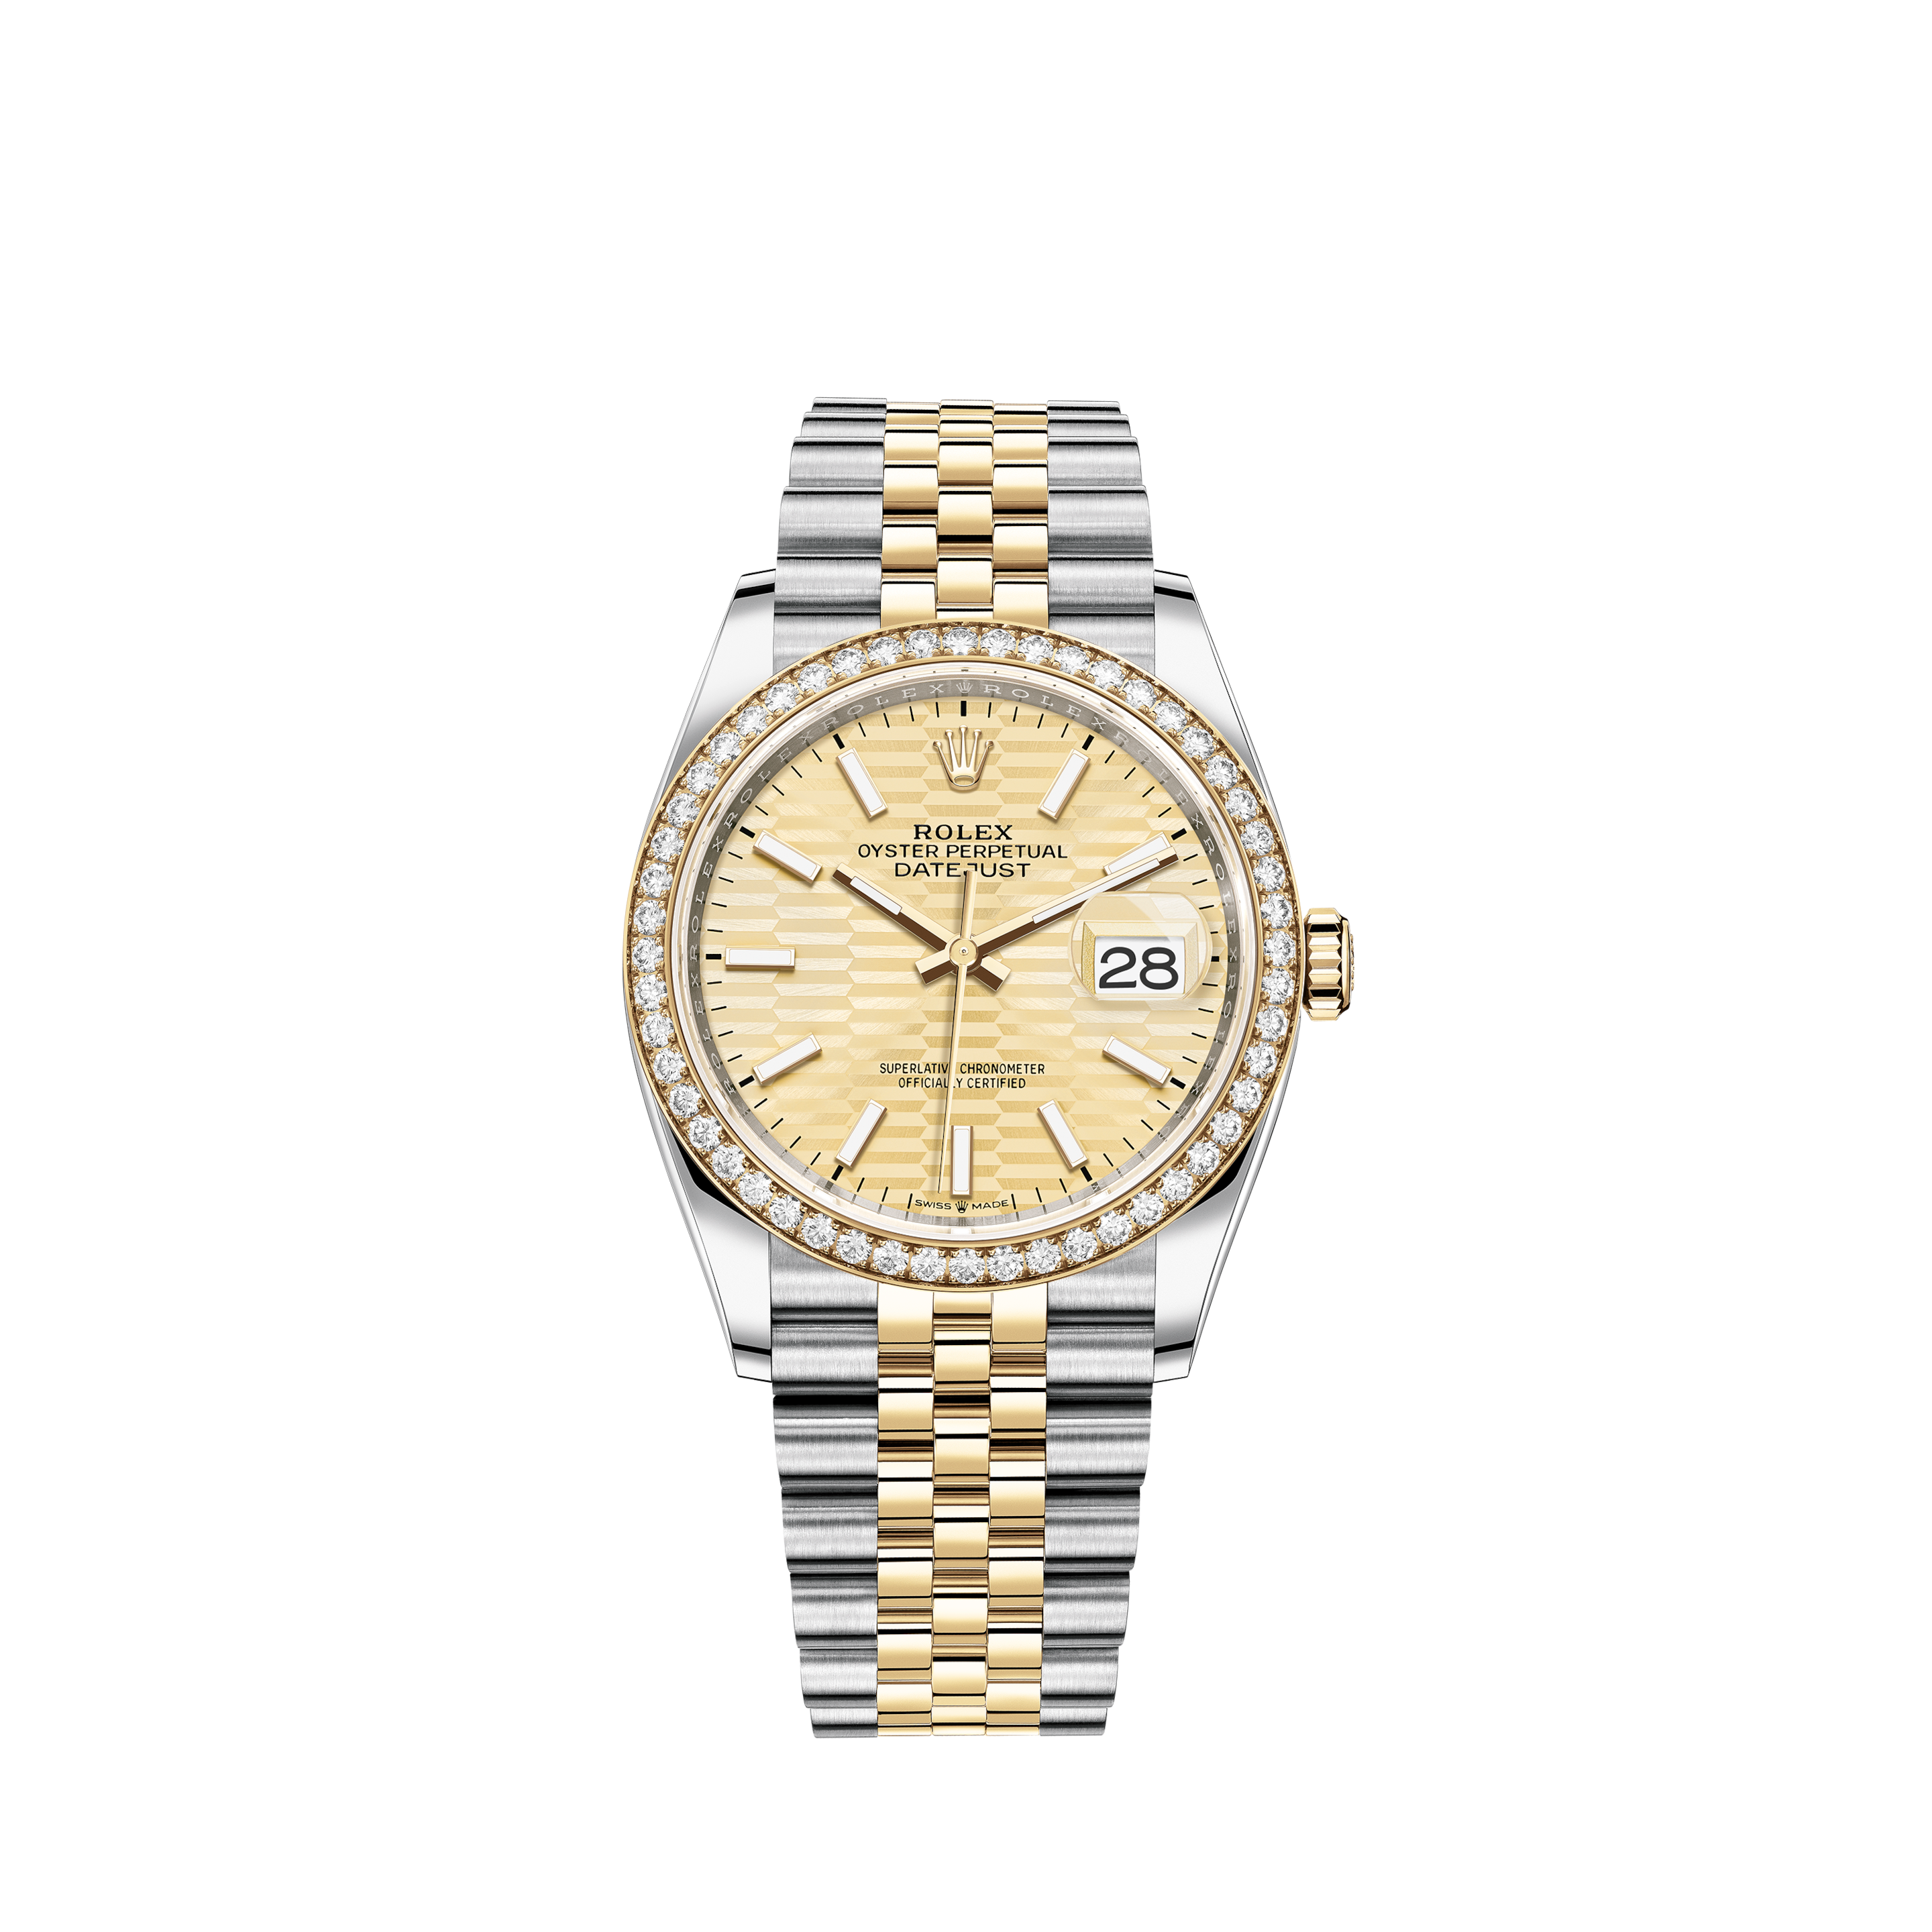 Rolex Oyster Perpetual open 6/9 - Stahl / Gelbgold - Armband Stahl / Gelbgold / Oyster - 36mm - Sehr gut - VintageRolex Women's Rolex 31mm Datejust Two Tone Jubilee Jubilee Ice Blue Color Dial Diamond Accent Bezel + Lugs + Sapphire